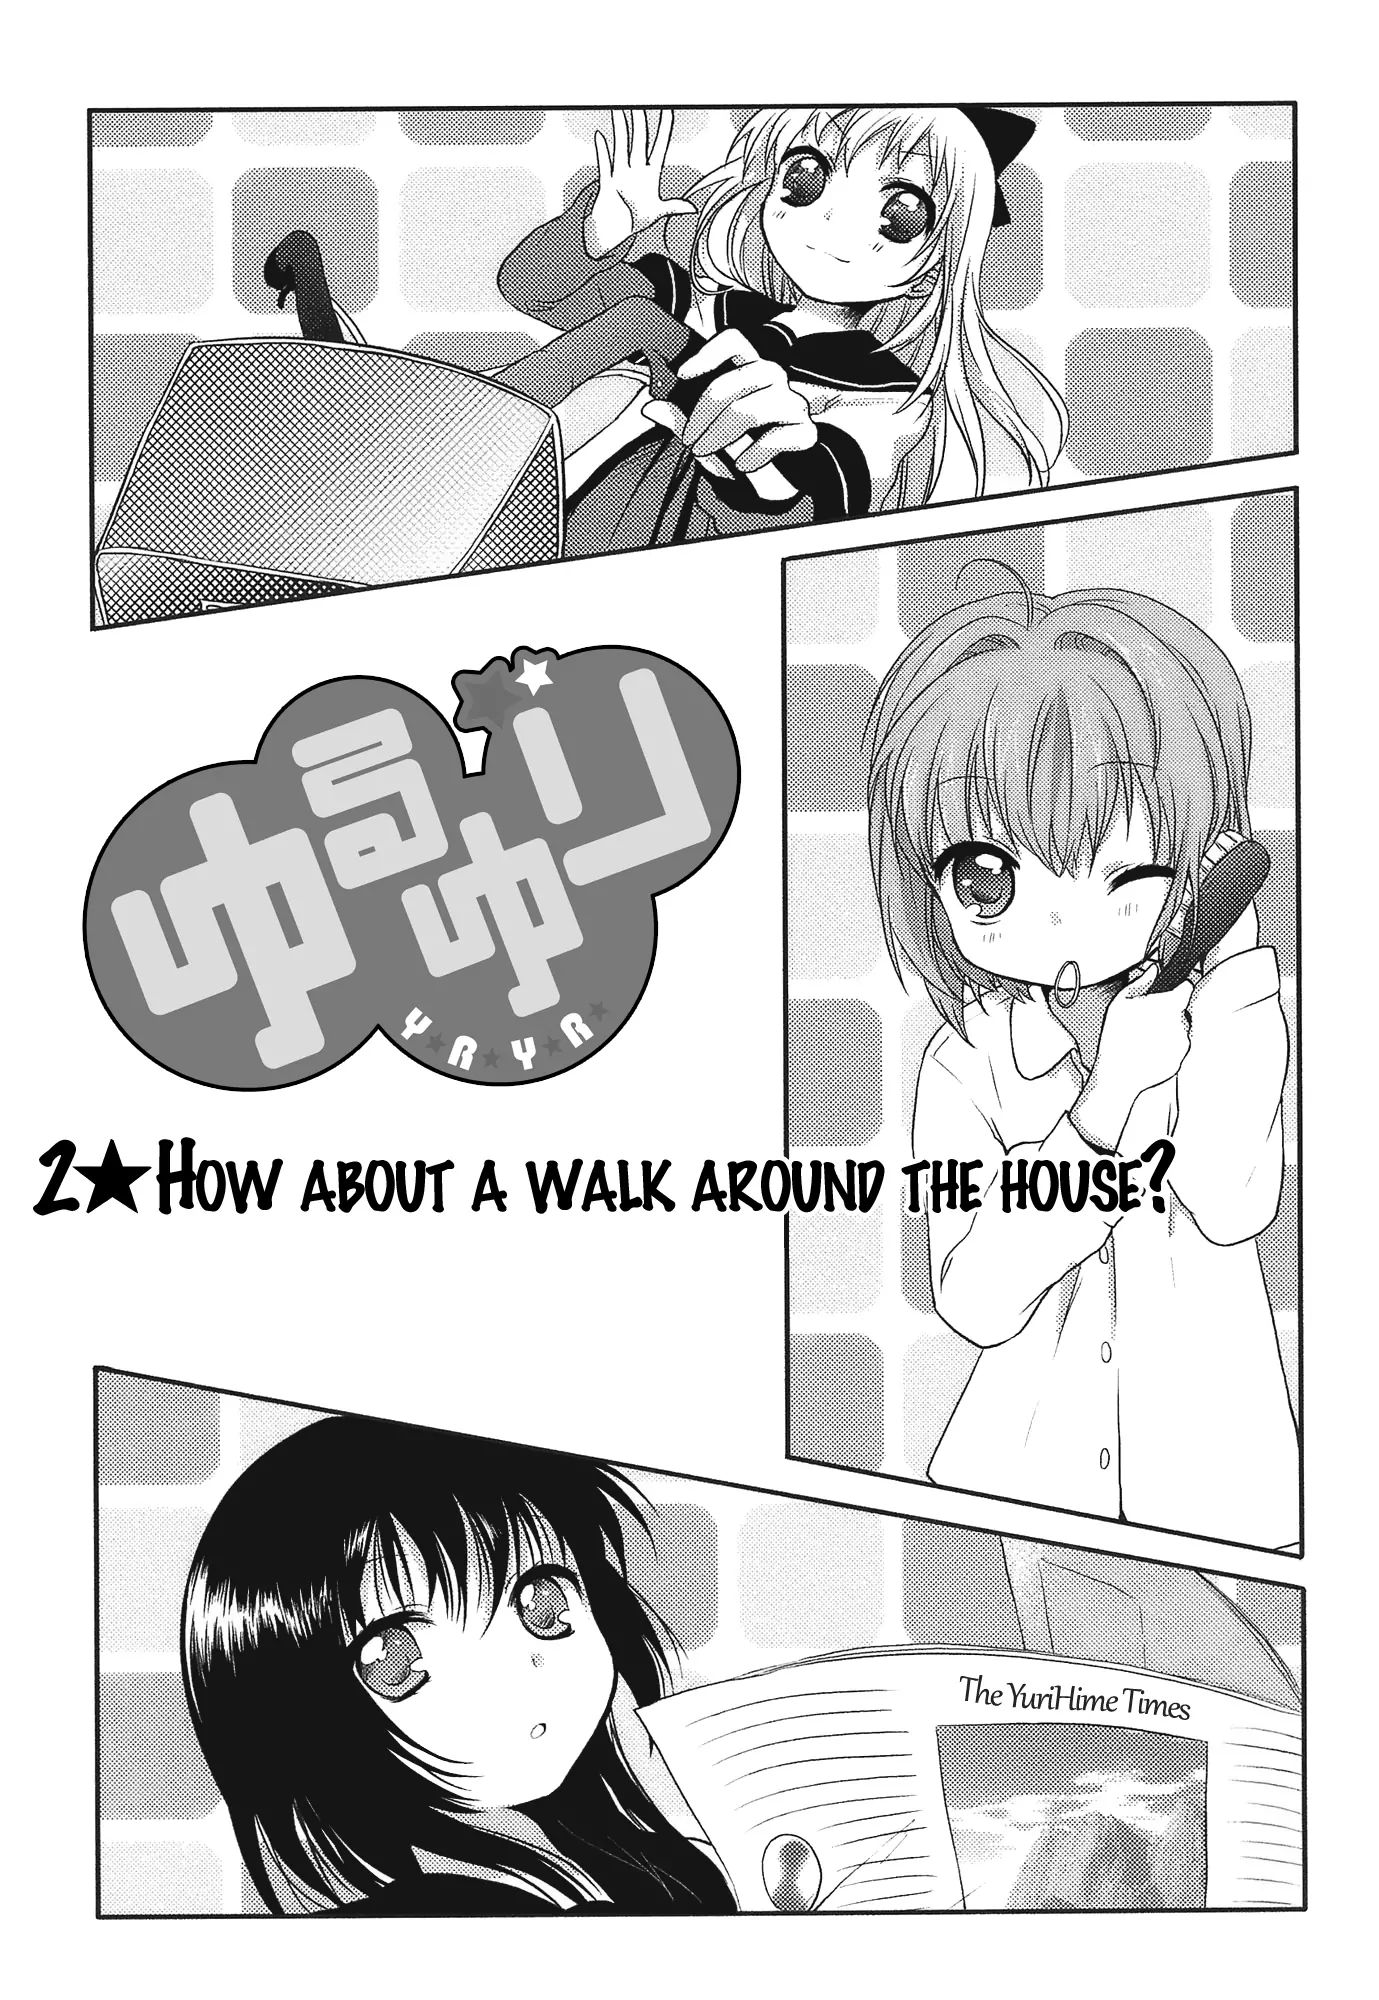 Yuru Yuri Vol.1 Chapter 2: How About A Walk Around The House? - Picture 1